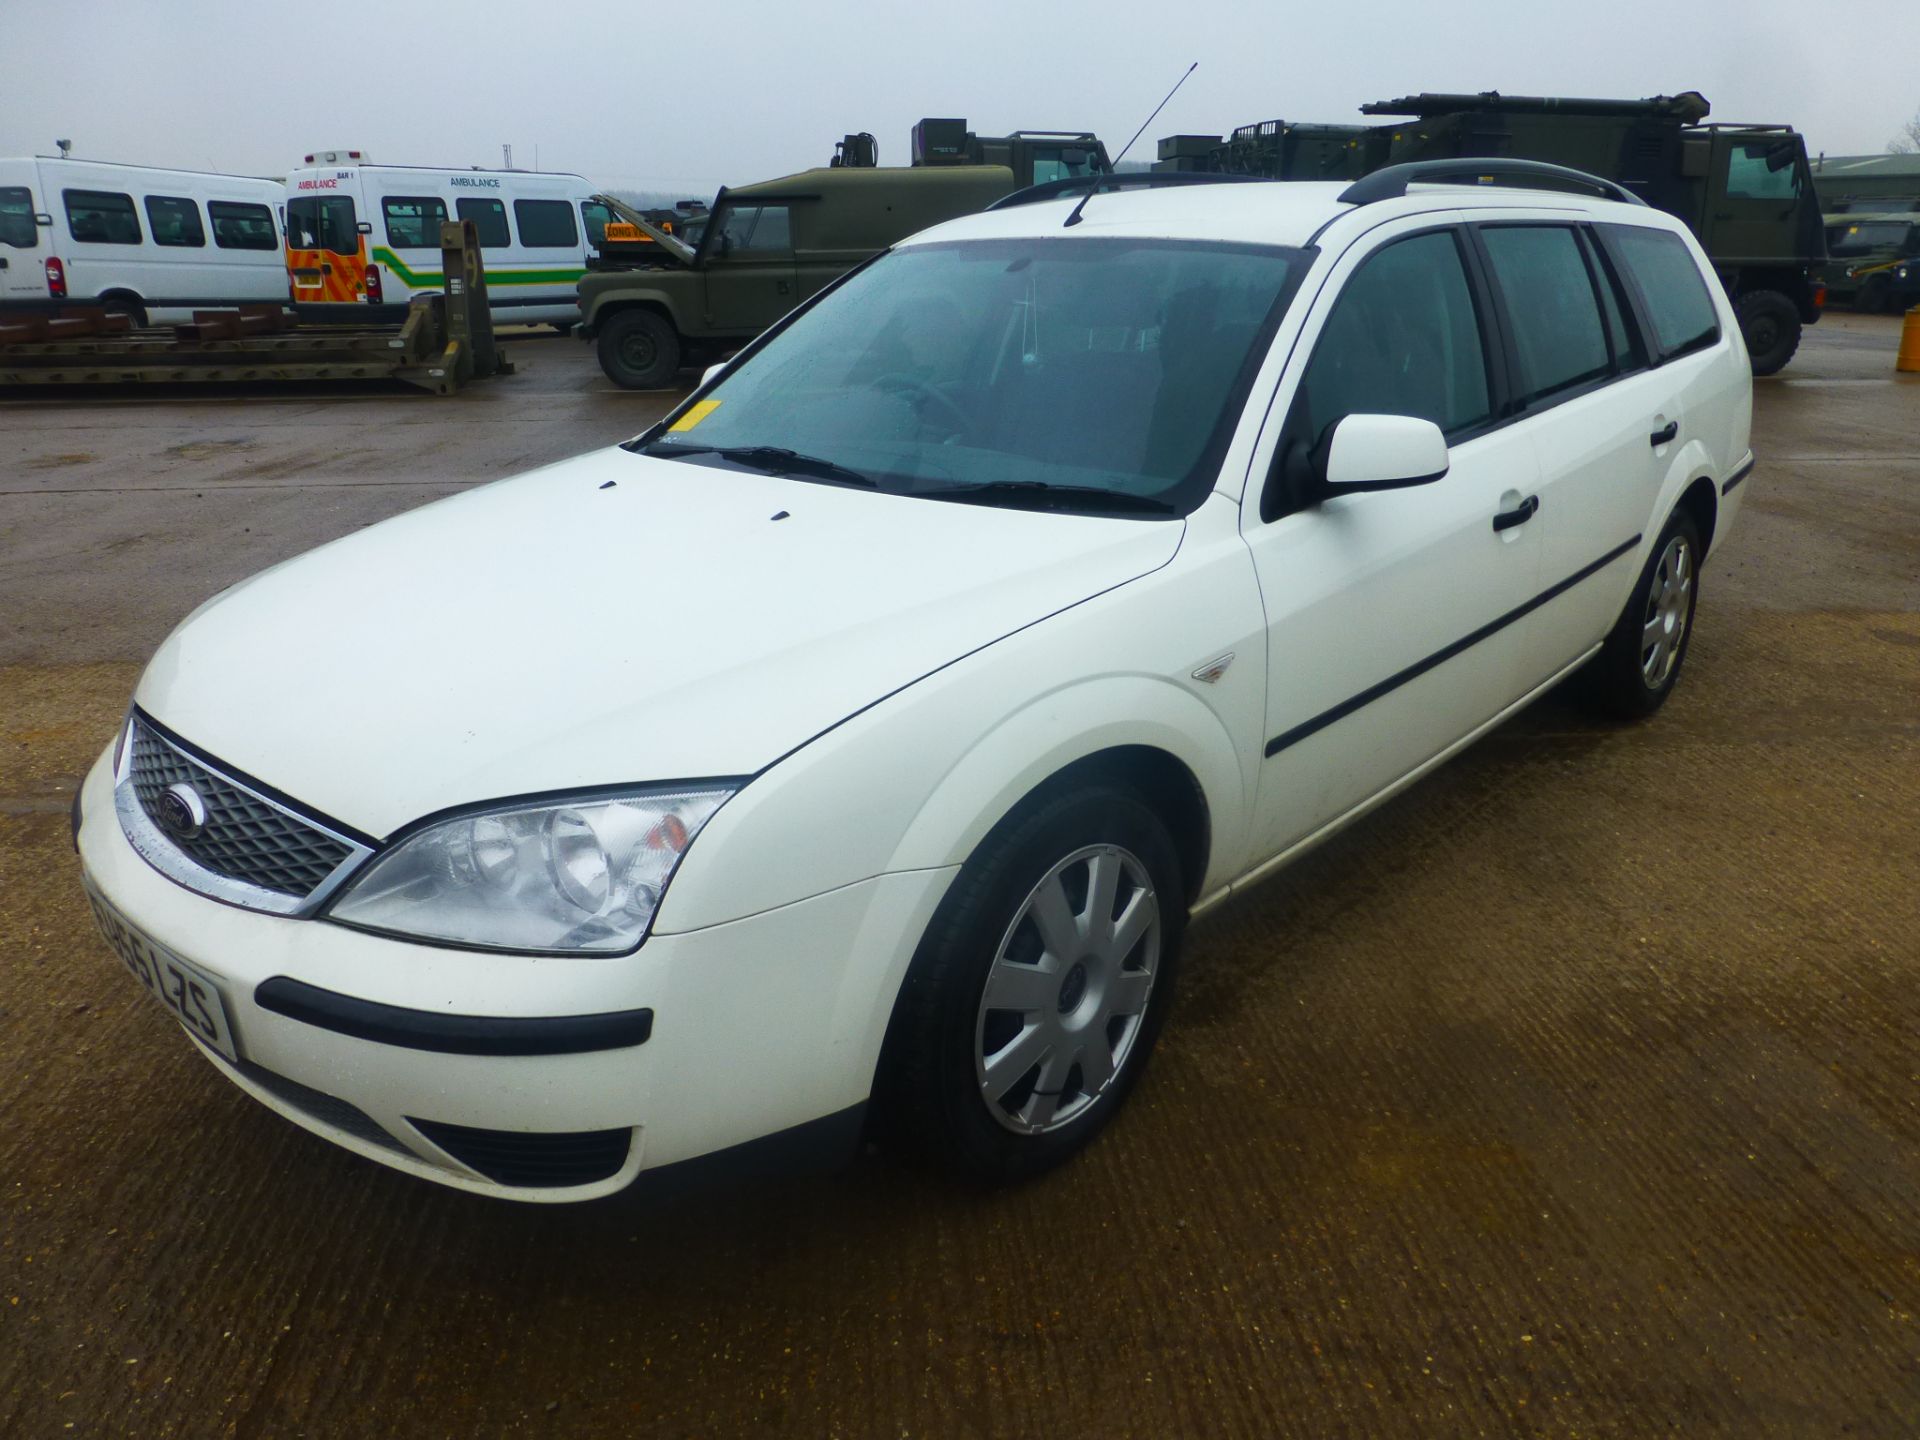 Ford Mondeo 2.0TDCi Estate - Image 3 of 16